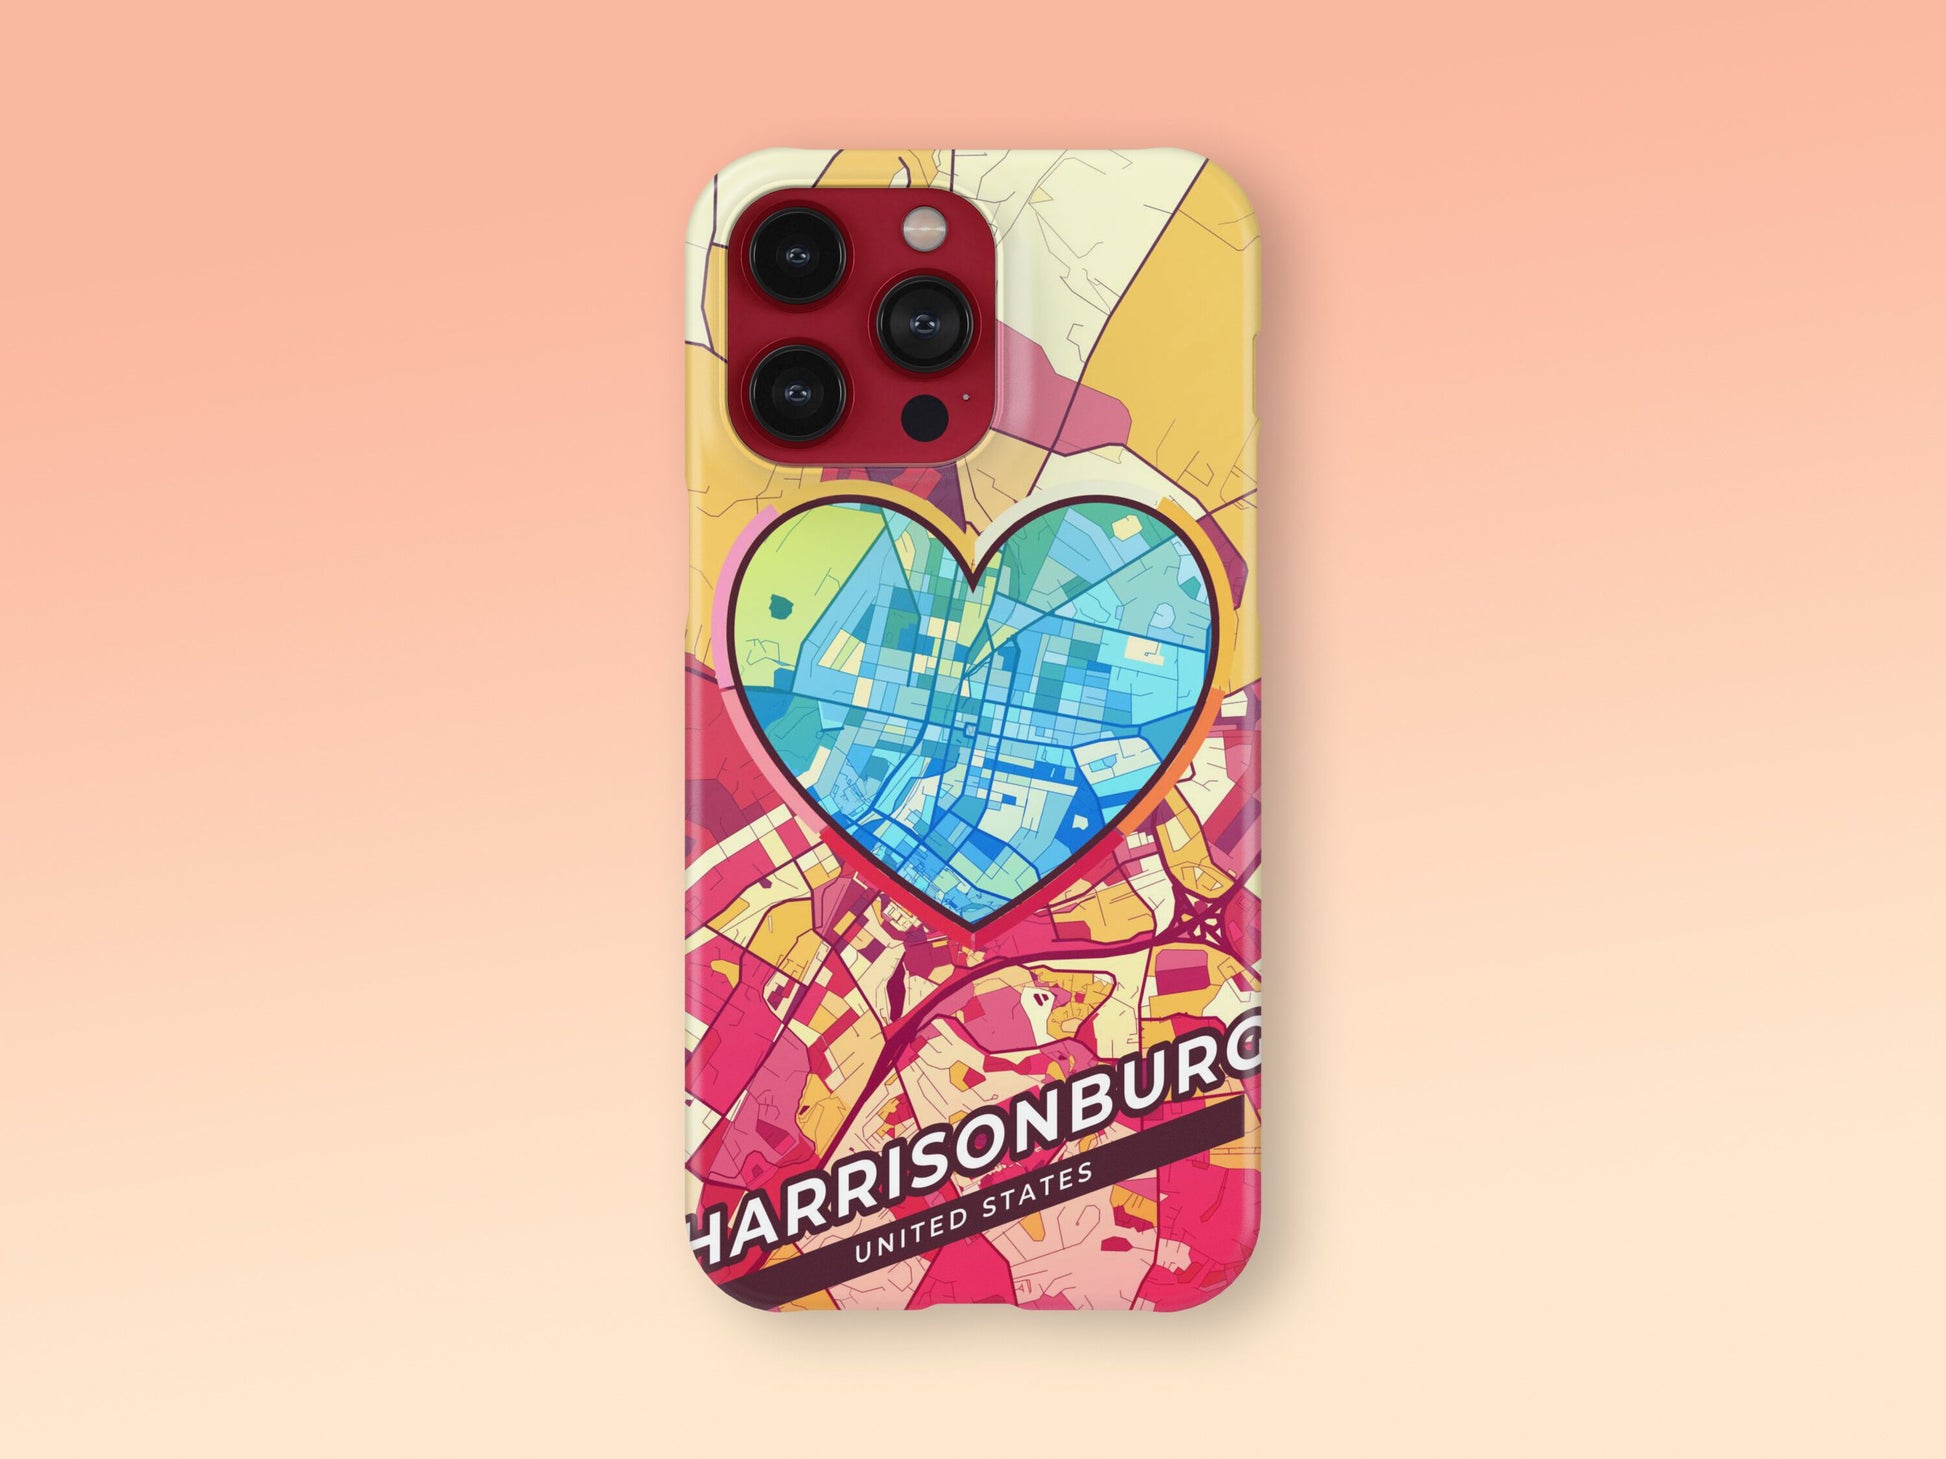 Harrisonburg Virginia slim phone case with colorful icon. Birthday, wedding or housewarming gift. Couple match cases. 2